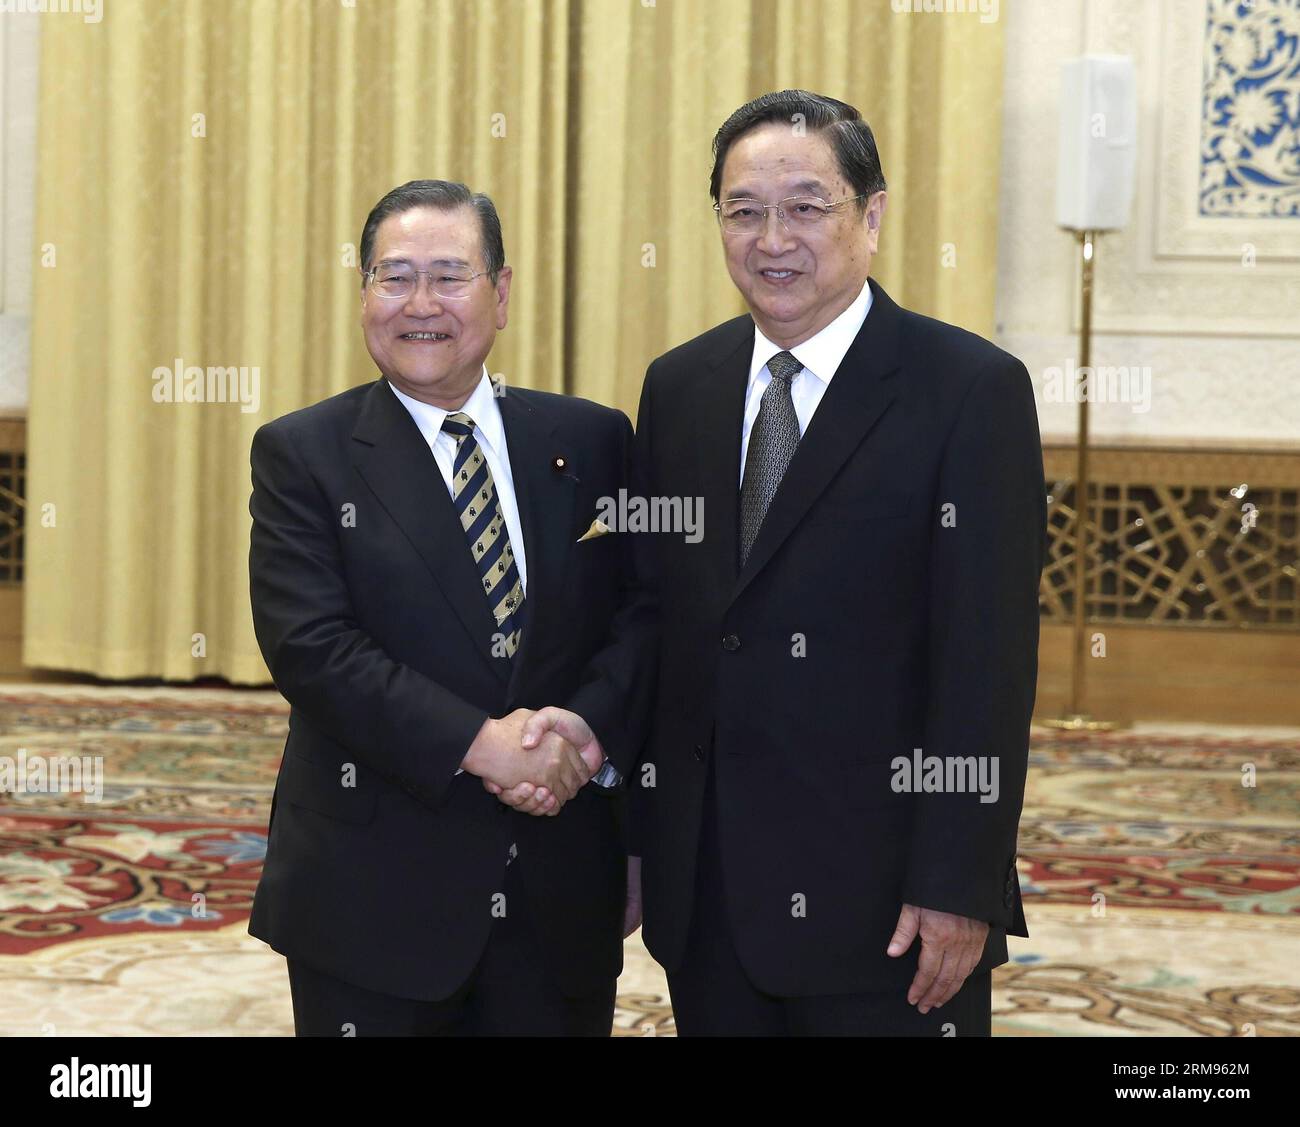 (140509) -- BEIJING, May 9, 2014 (Xinhua) -- Yu Zhengsheng (R), chairman of the National Committee of the Chinese People s Political Consultative Conference, meets with a group of Japanese lawmakers led by Takeshi Noda (L), the veteran Liberal Democratic Party (LDP) lawmaker, in Beijing, capital of China, May 9, 2014. (Xinhua/Pang Xinglei) (yxb) CHINA-BEIJING-YU ZHENGSHENG-JAPAN-MEETING (CN) PUBLICATIONxNOTxINxCHN   Beijing May 9 2014 XINHUA Yu Zheng Sheng r Chairman of The National Committee of The Chinese Celebrities S Political Consultative Conference Meets With a Group of Japanese lawmaker Stock Photo